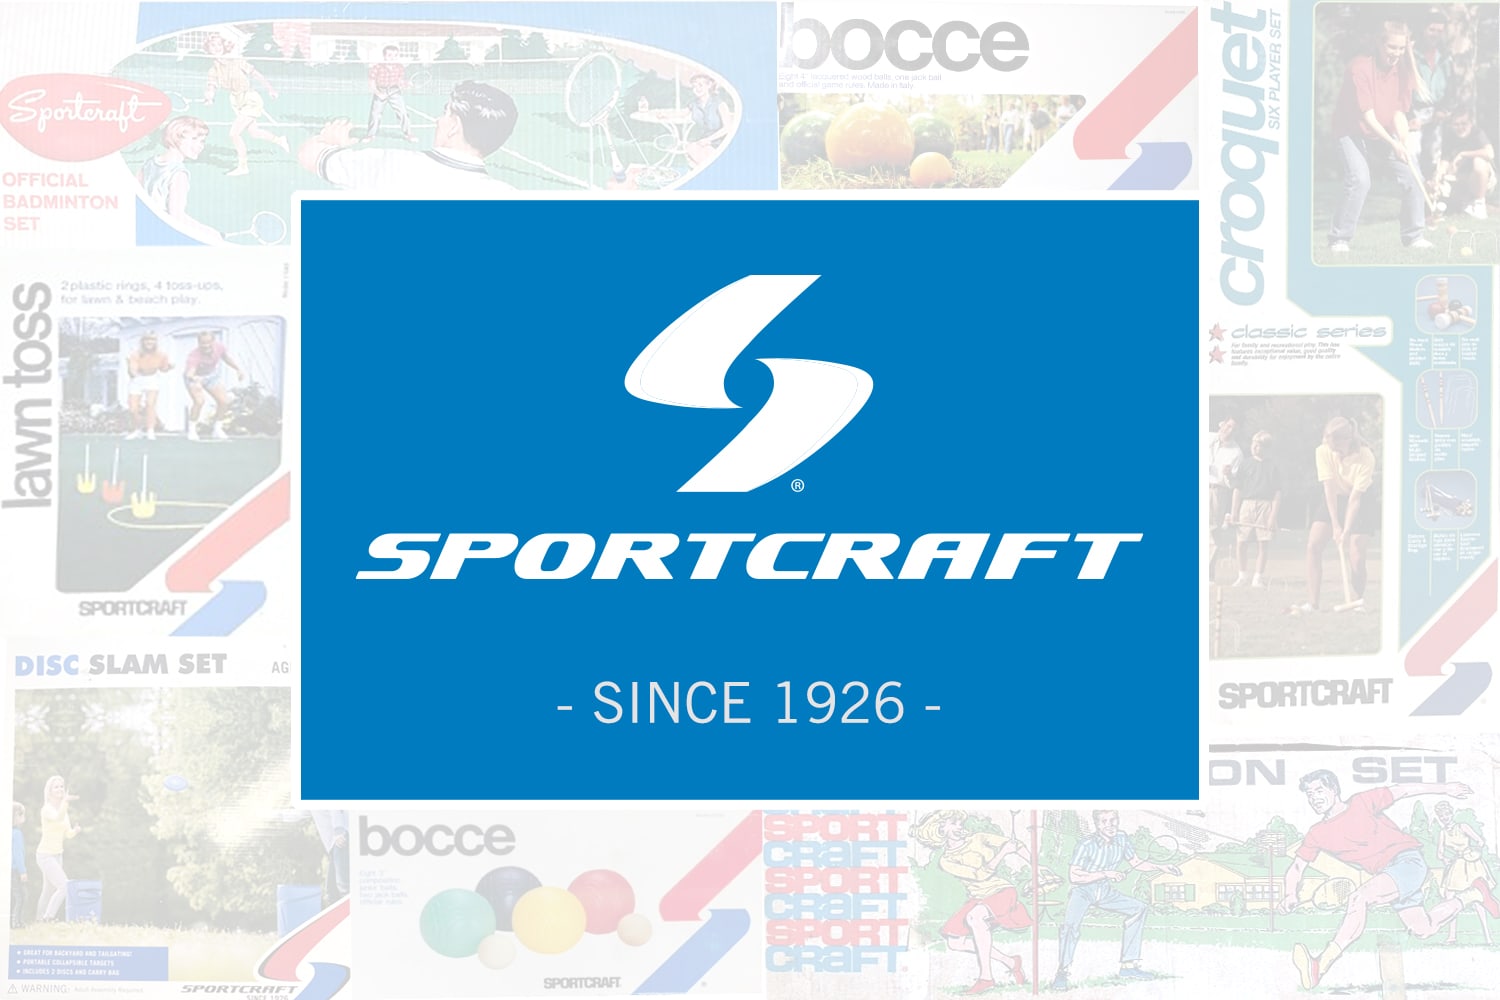 Sportcraft logo - Since 1926.  Image showing some vintage Sportcraft packaging